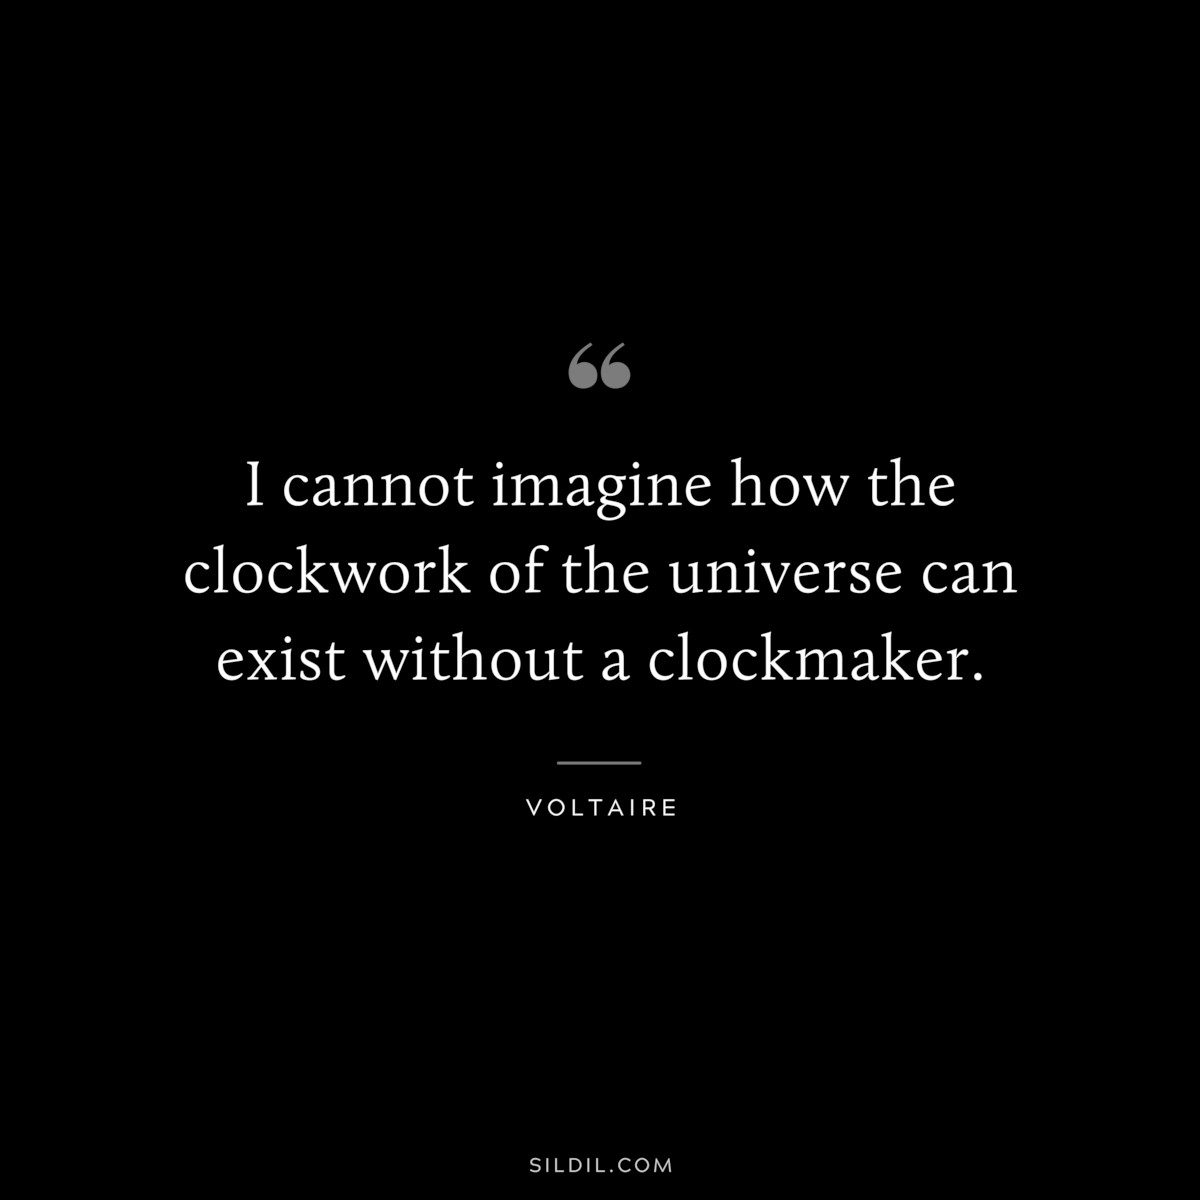 I cannot imagine how the clockwork of the universe can exist without a clockmaker. ― Voltaire